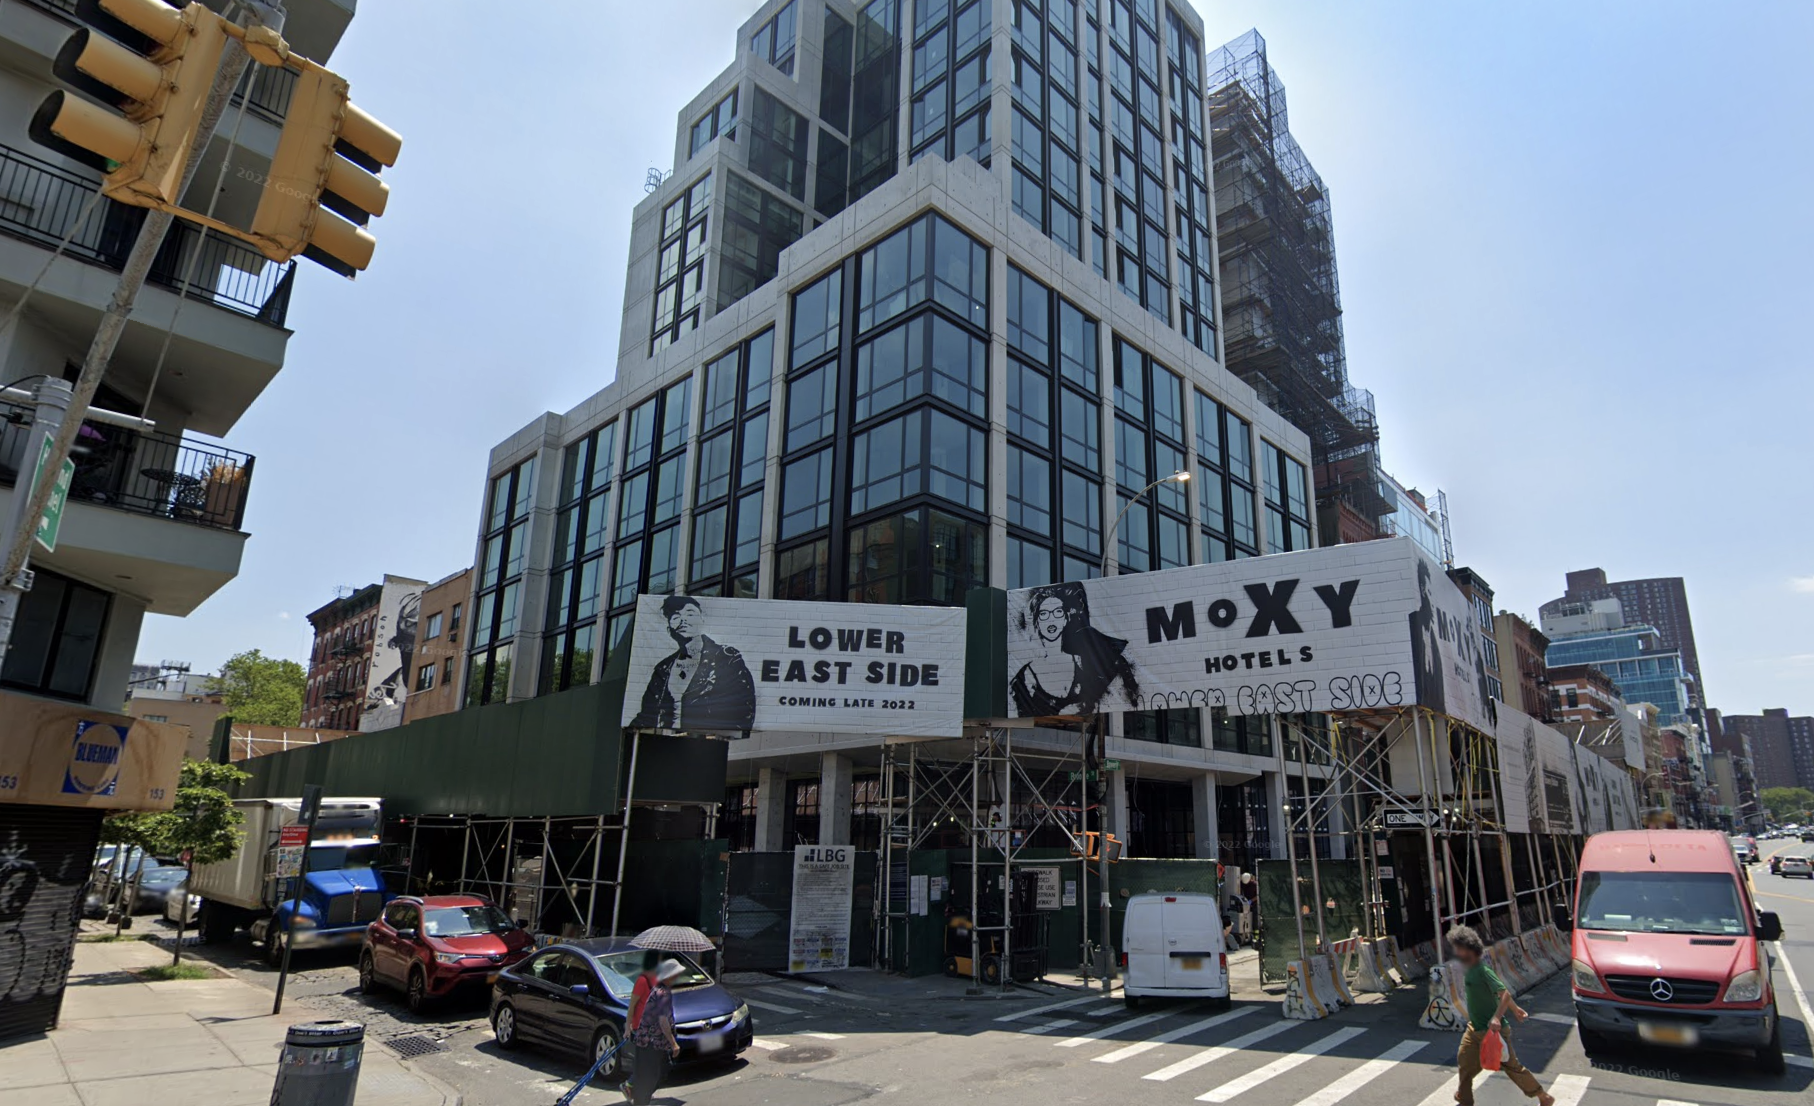 A screenshot of the exterior of the Moxy Hotel on the Lower East Side taken on Google Maps.